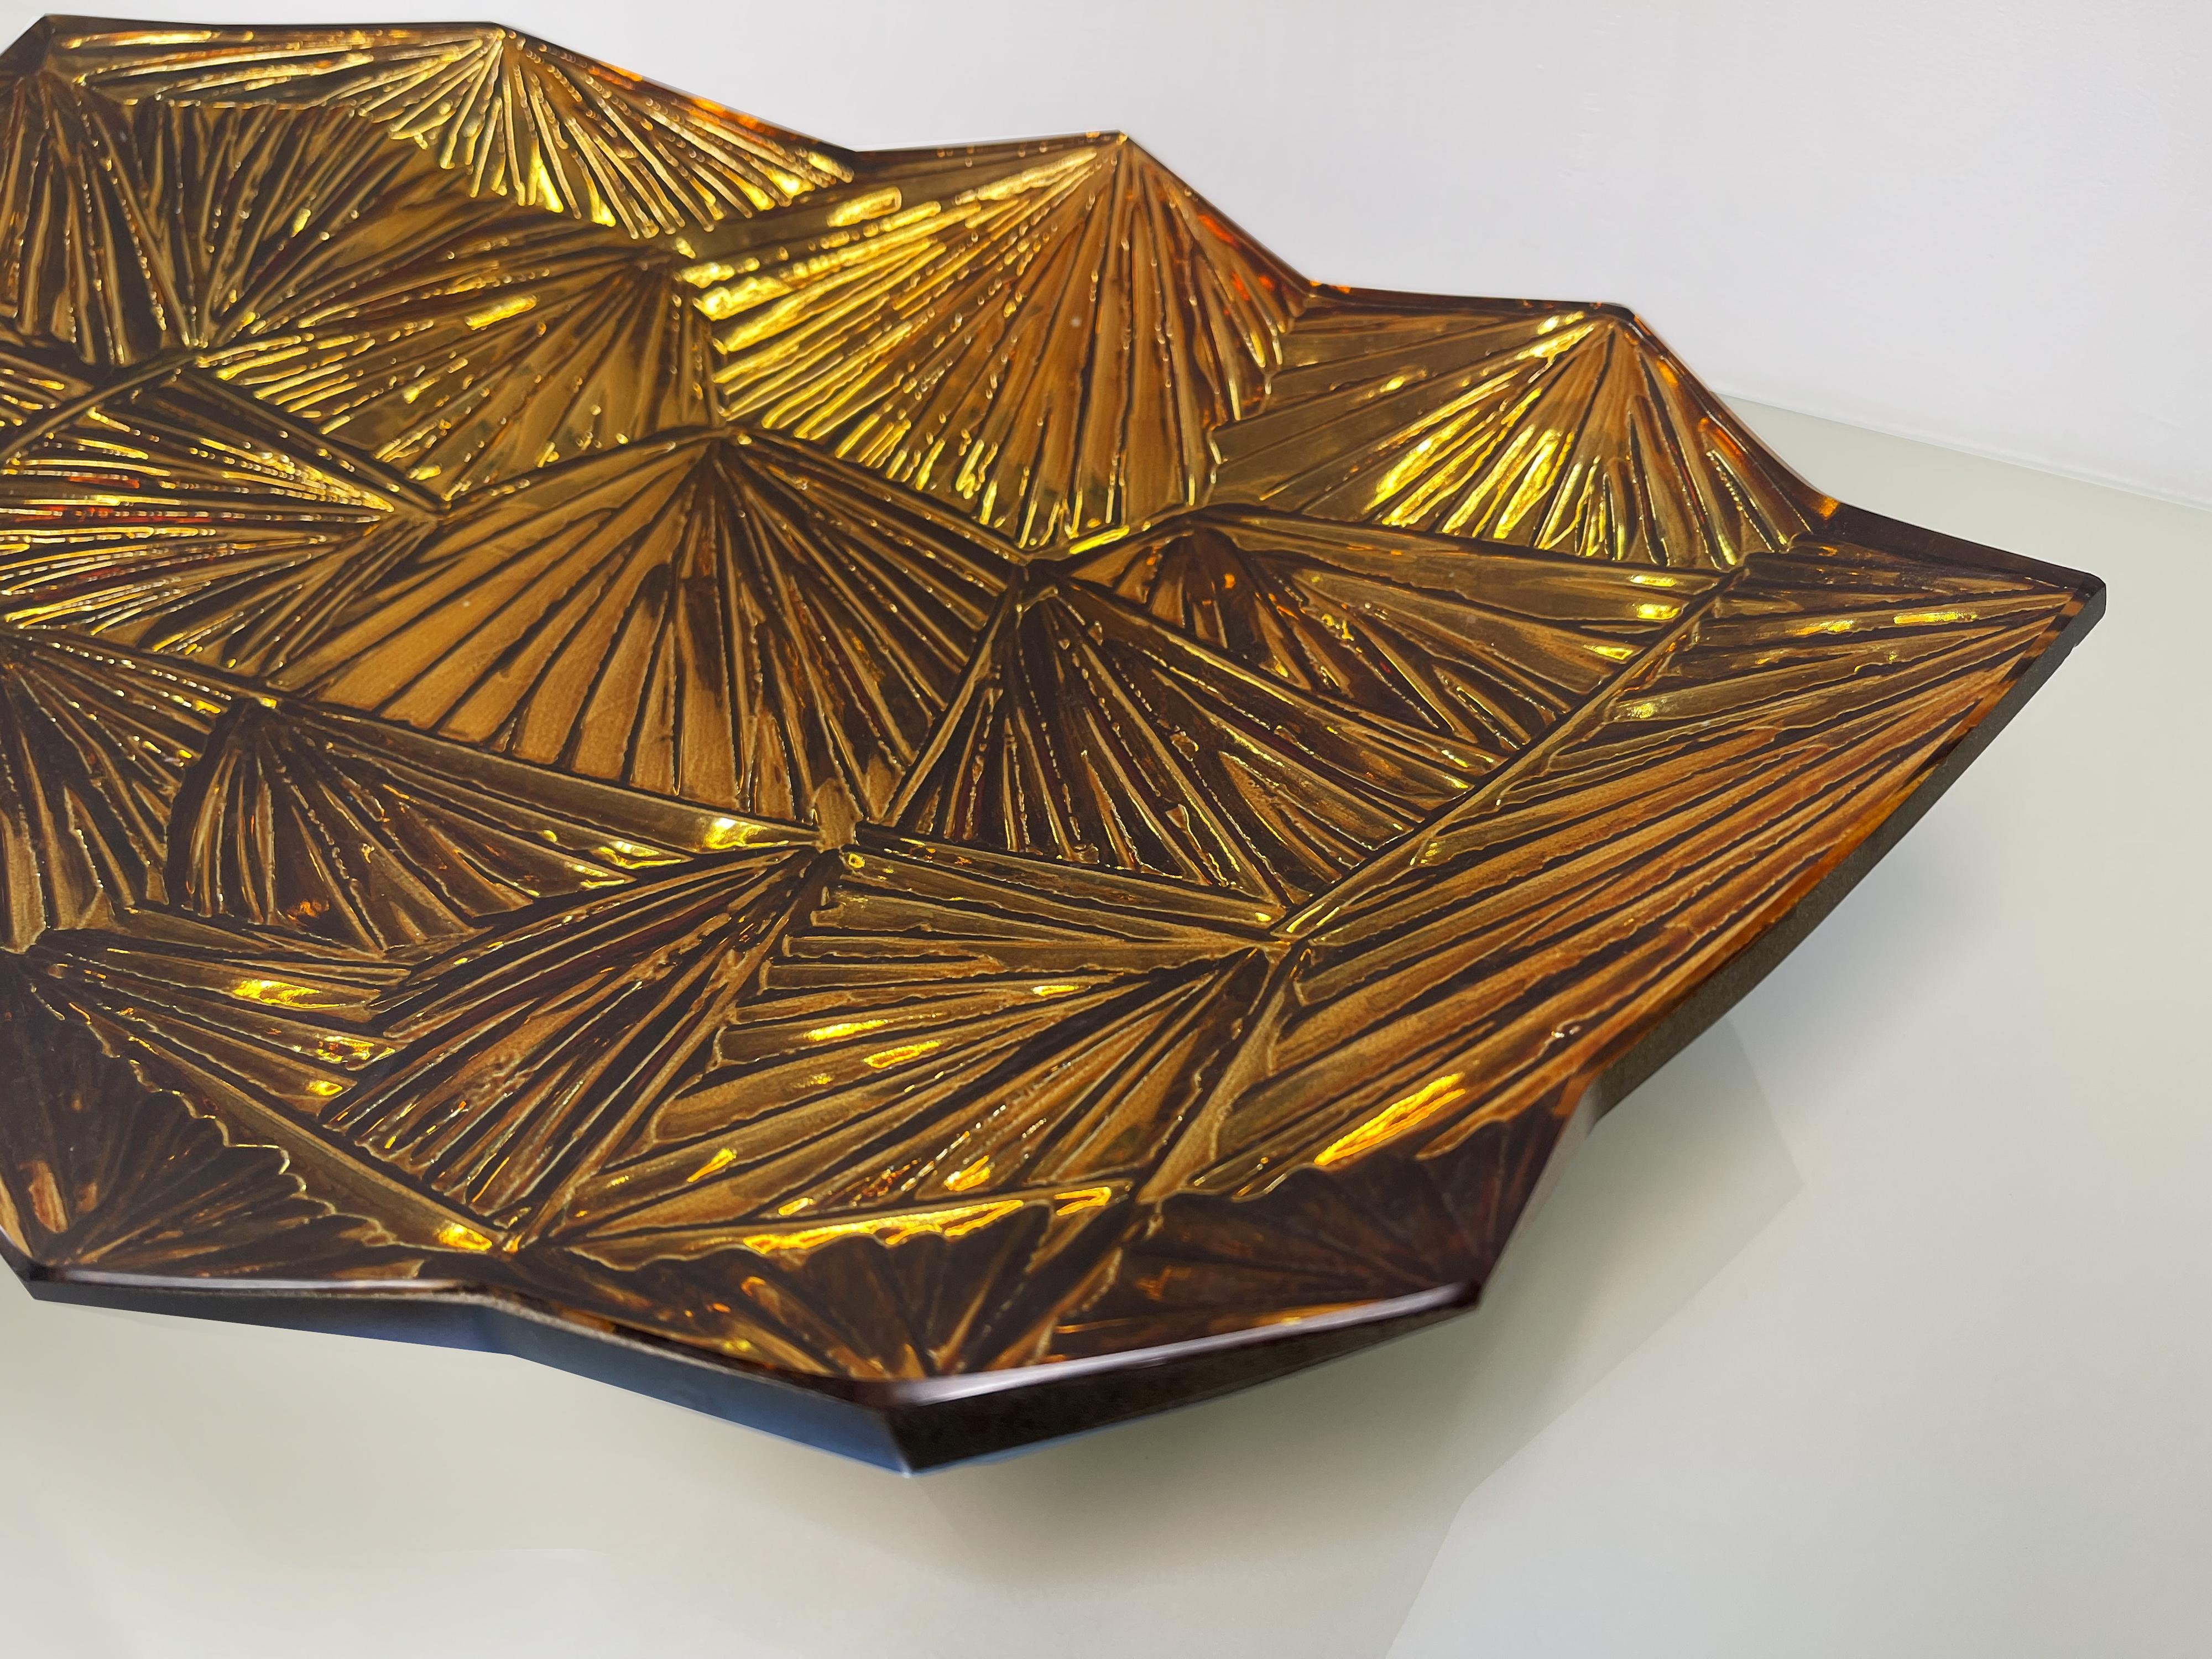 Modern Contemporary 'Amber' Artistic Bowl Amber and Gold Crystal by Ghirò Studio For Sale